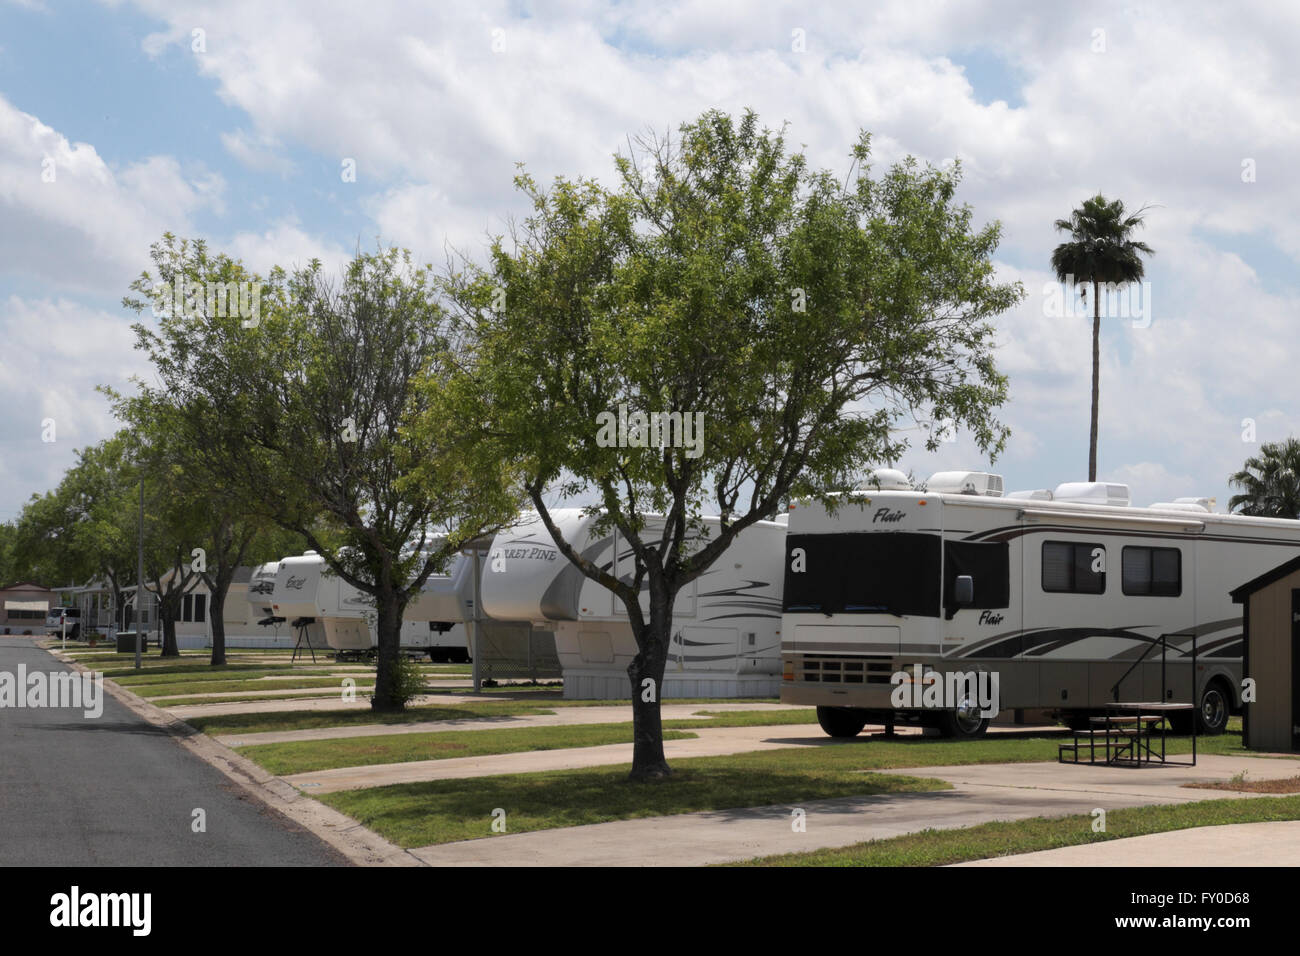 A motor home, several fifth wheel trailers and mobile homes parked in line at a mobile home/RV resort in south Texas, USA. Stock Photo